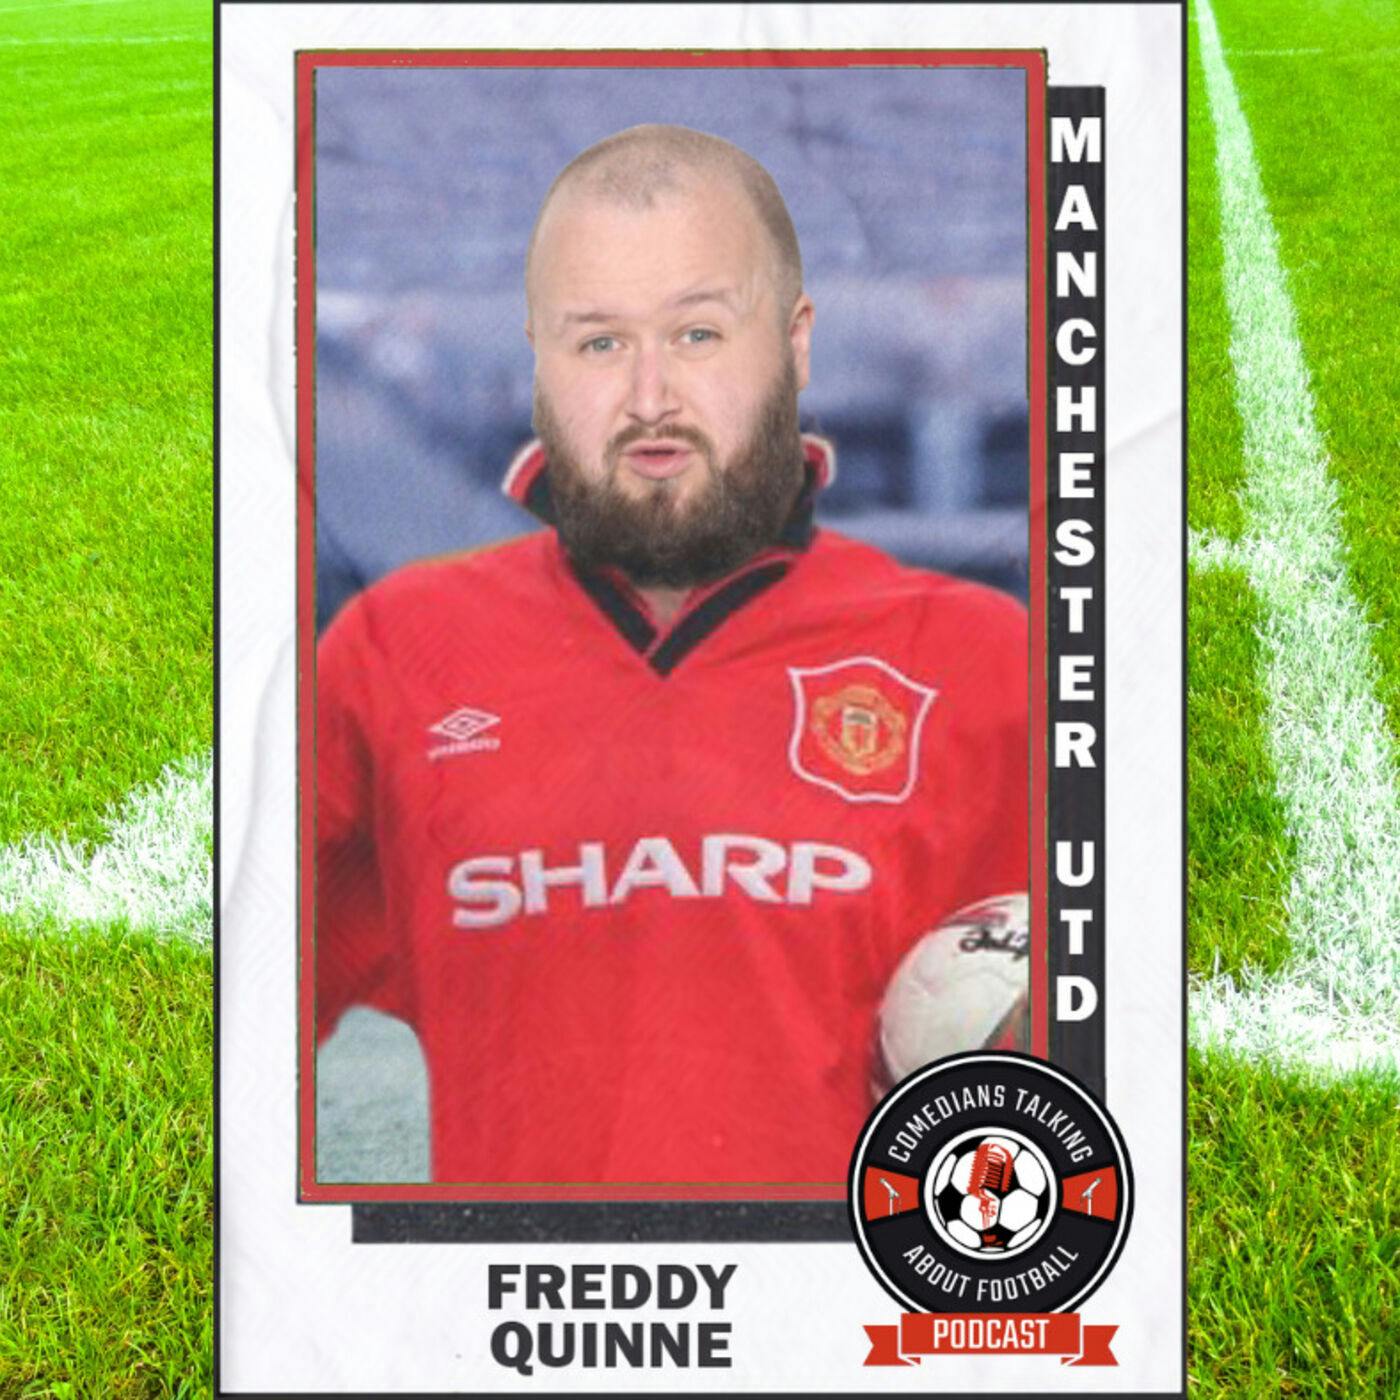 Freddy Quinne on Manchester United - Ep 22